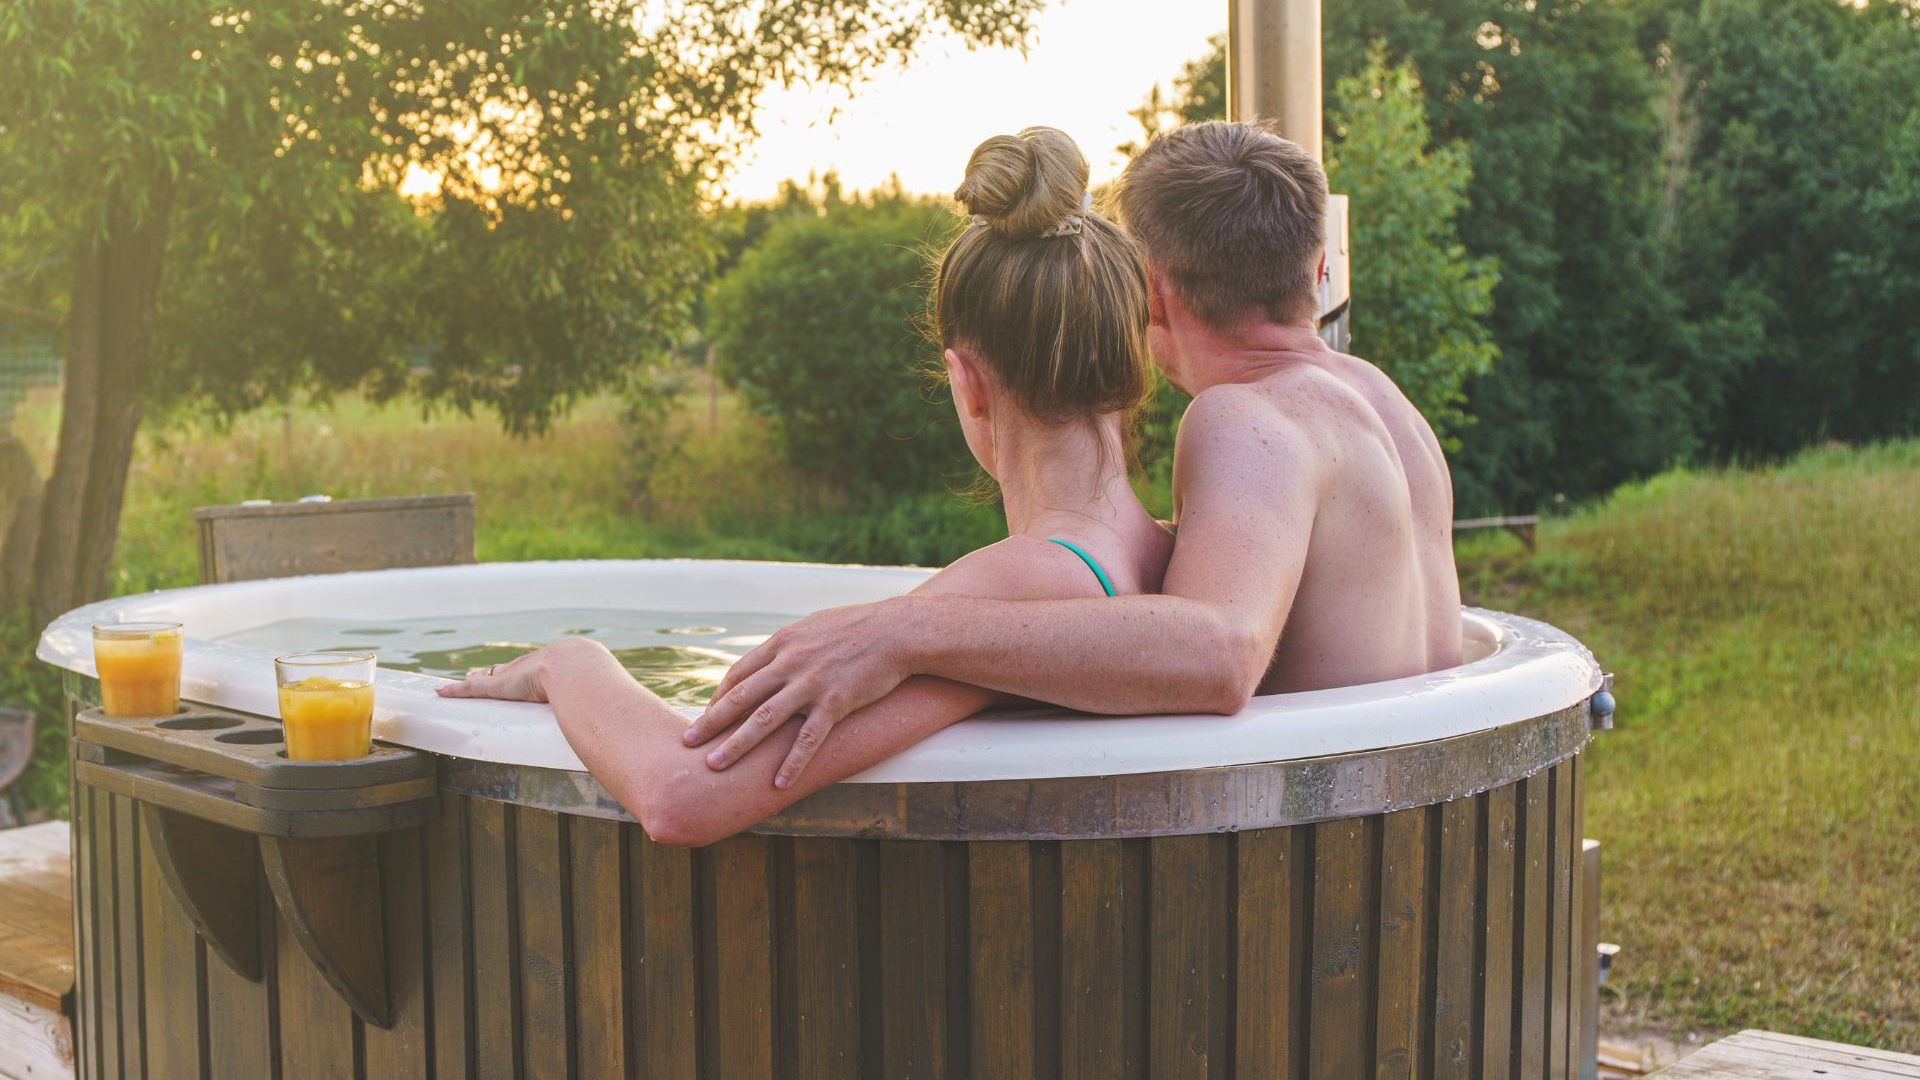 Young couple in an outdoor hot tub gazing at the countryside scenery